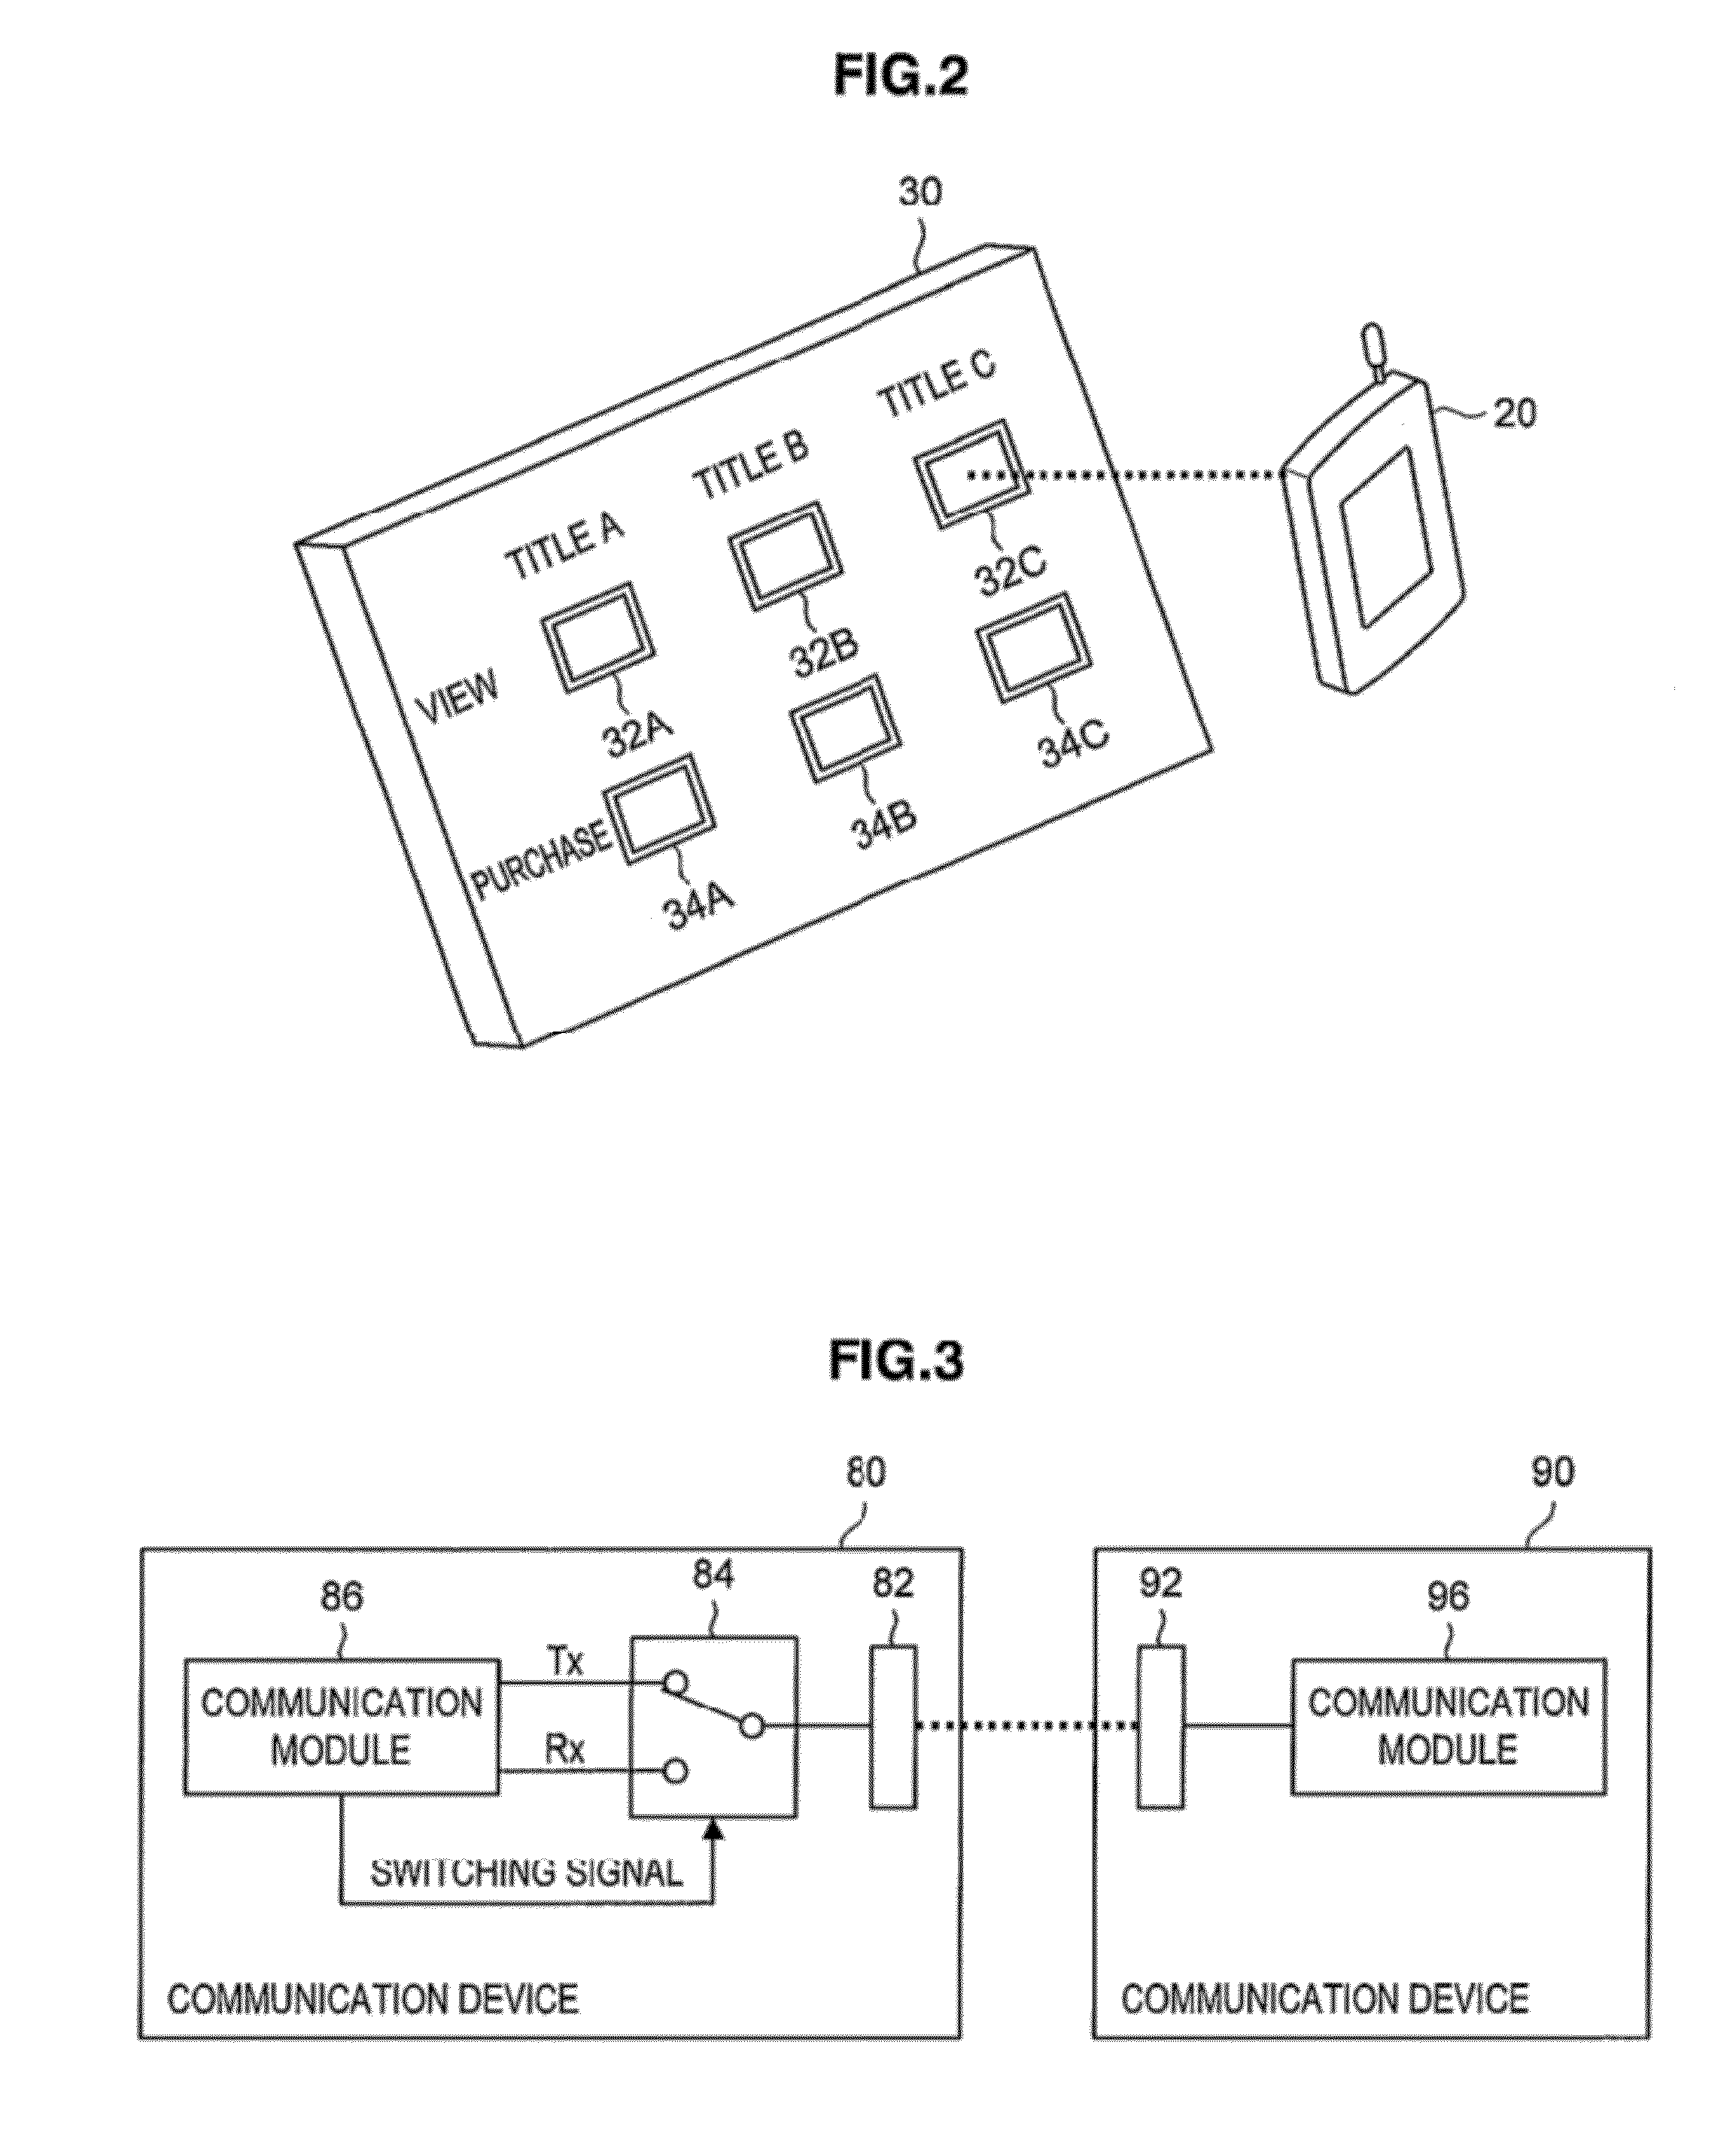 Near field communication apparatus for automated assigning of various functions